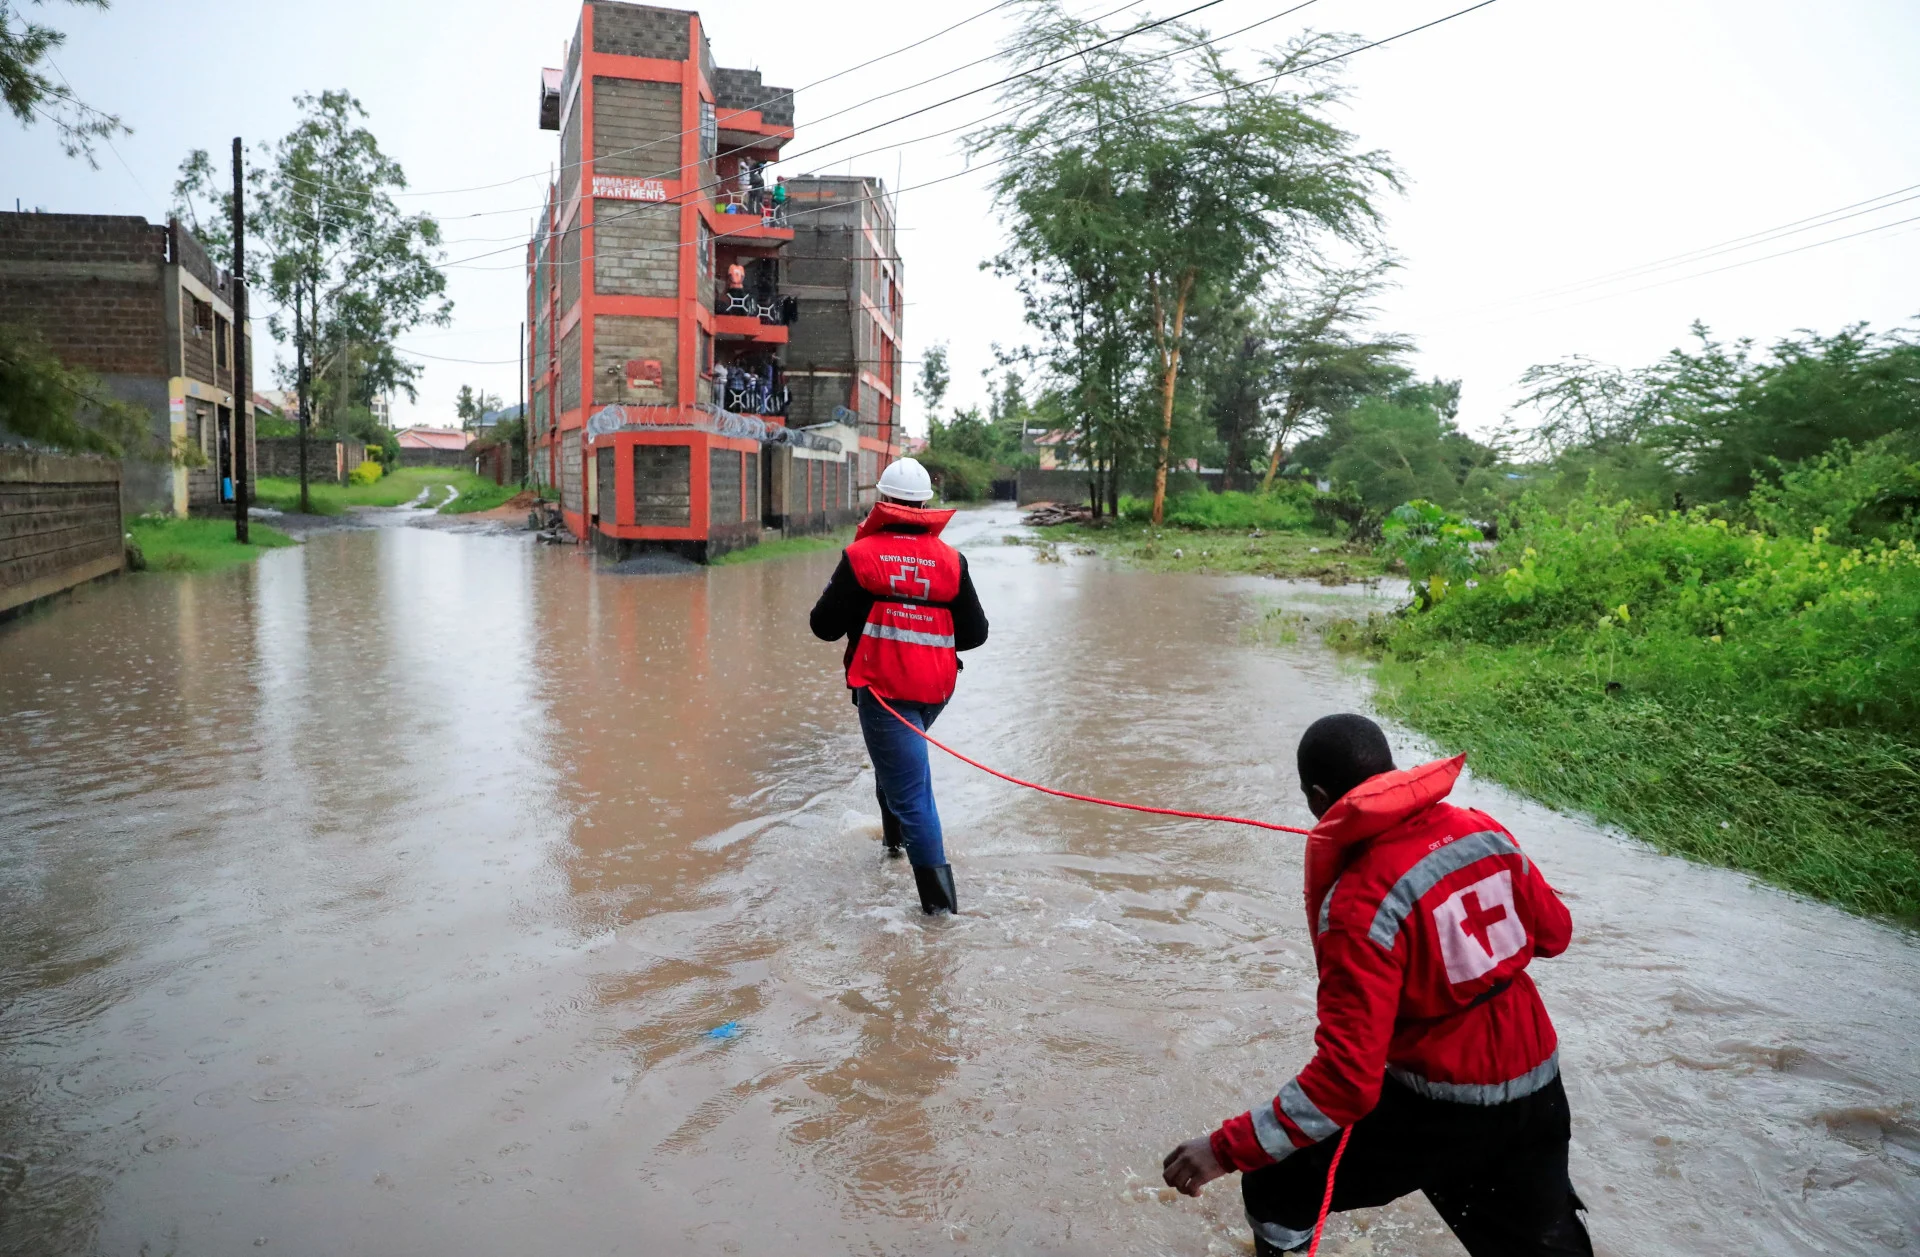 Reuters: Kenya Red Cross members hold on to a safety rope as they wade through flood waters to assess and rescue residents trapped in their homes marooned after a seasonal river burst its banks REUTERS/Thomas Mukoya